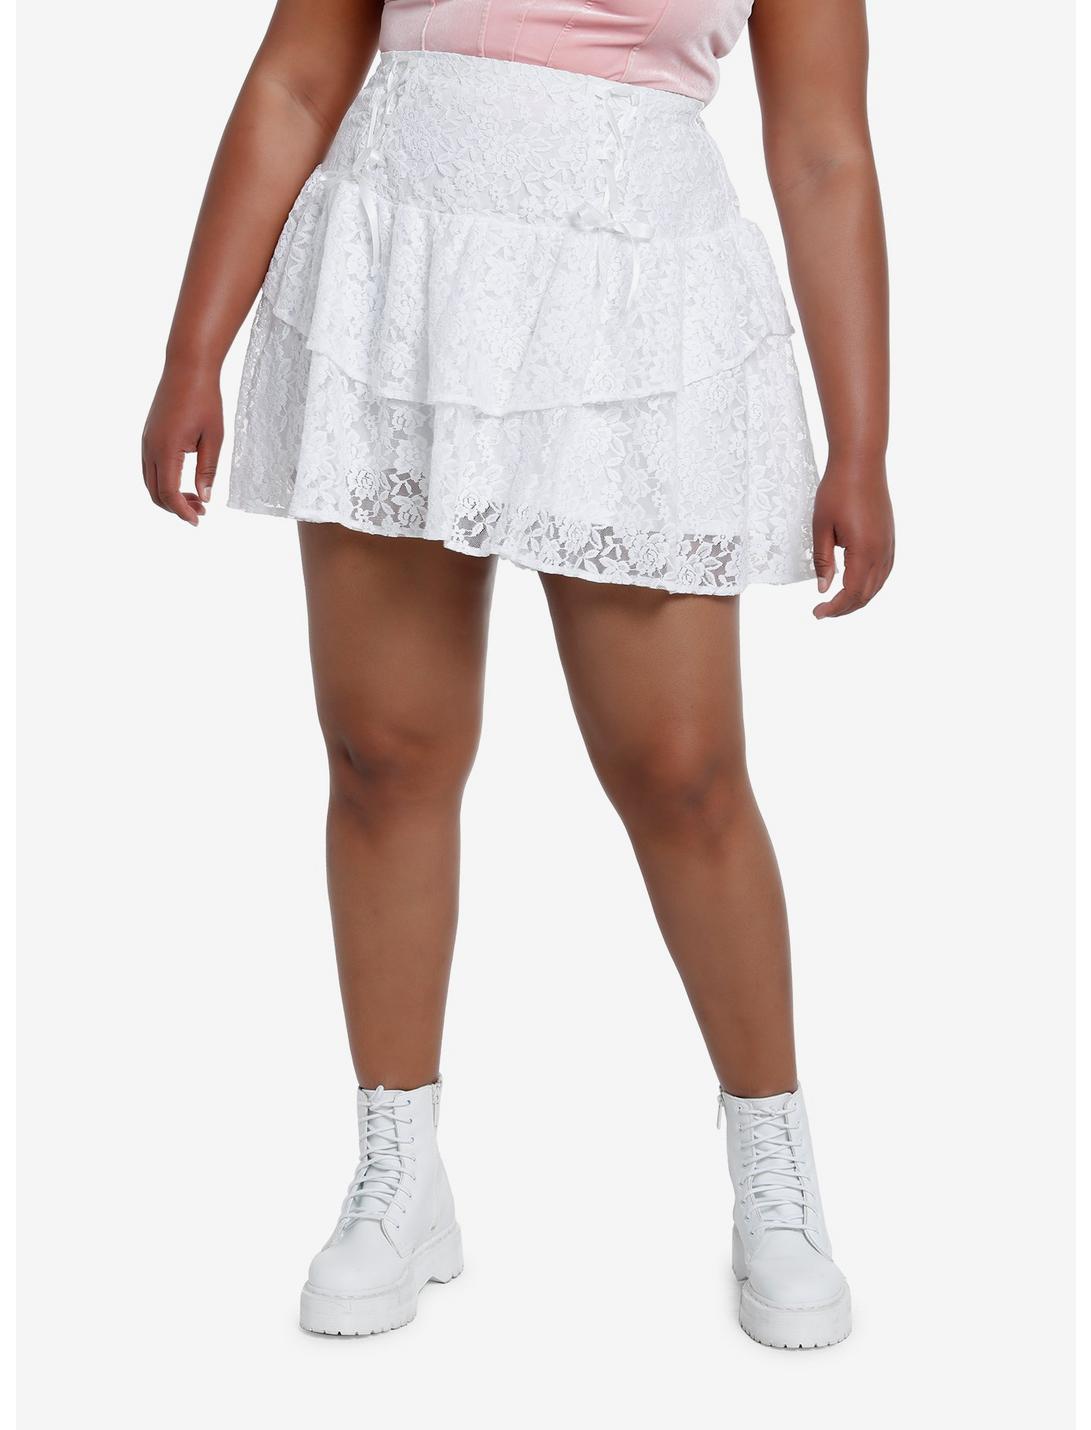 Sweet Society White Lace Tiered Skirt Plus Size, BRIGHT WHITE, hi-res